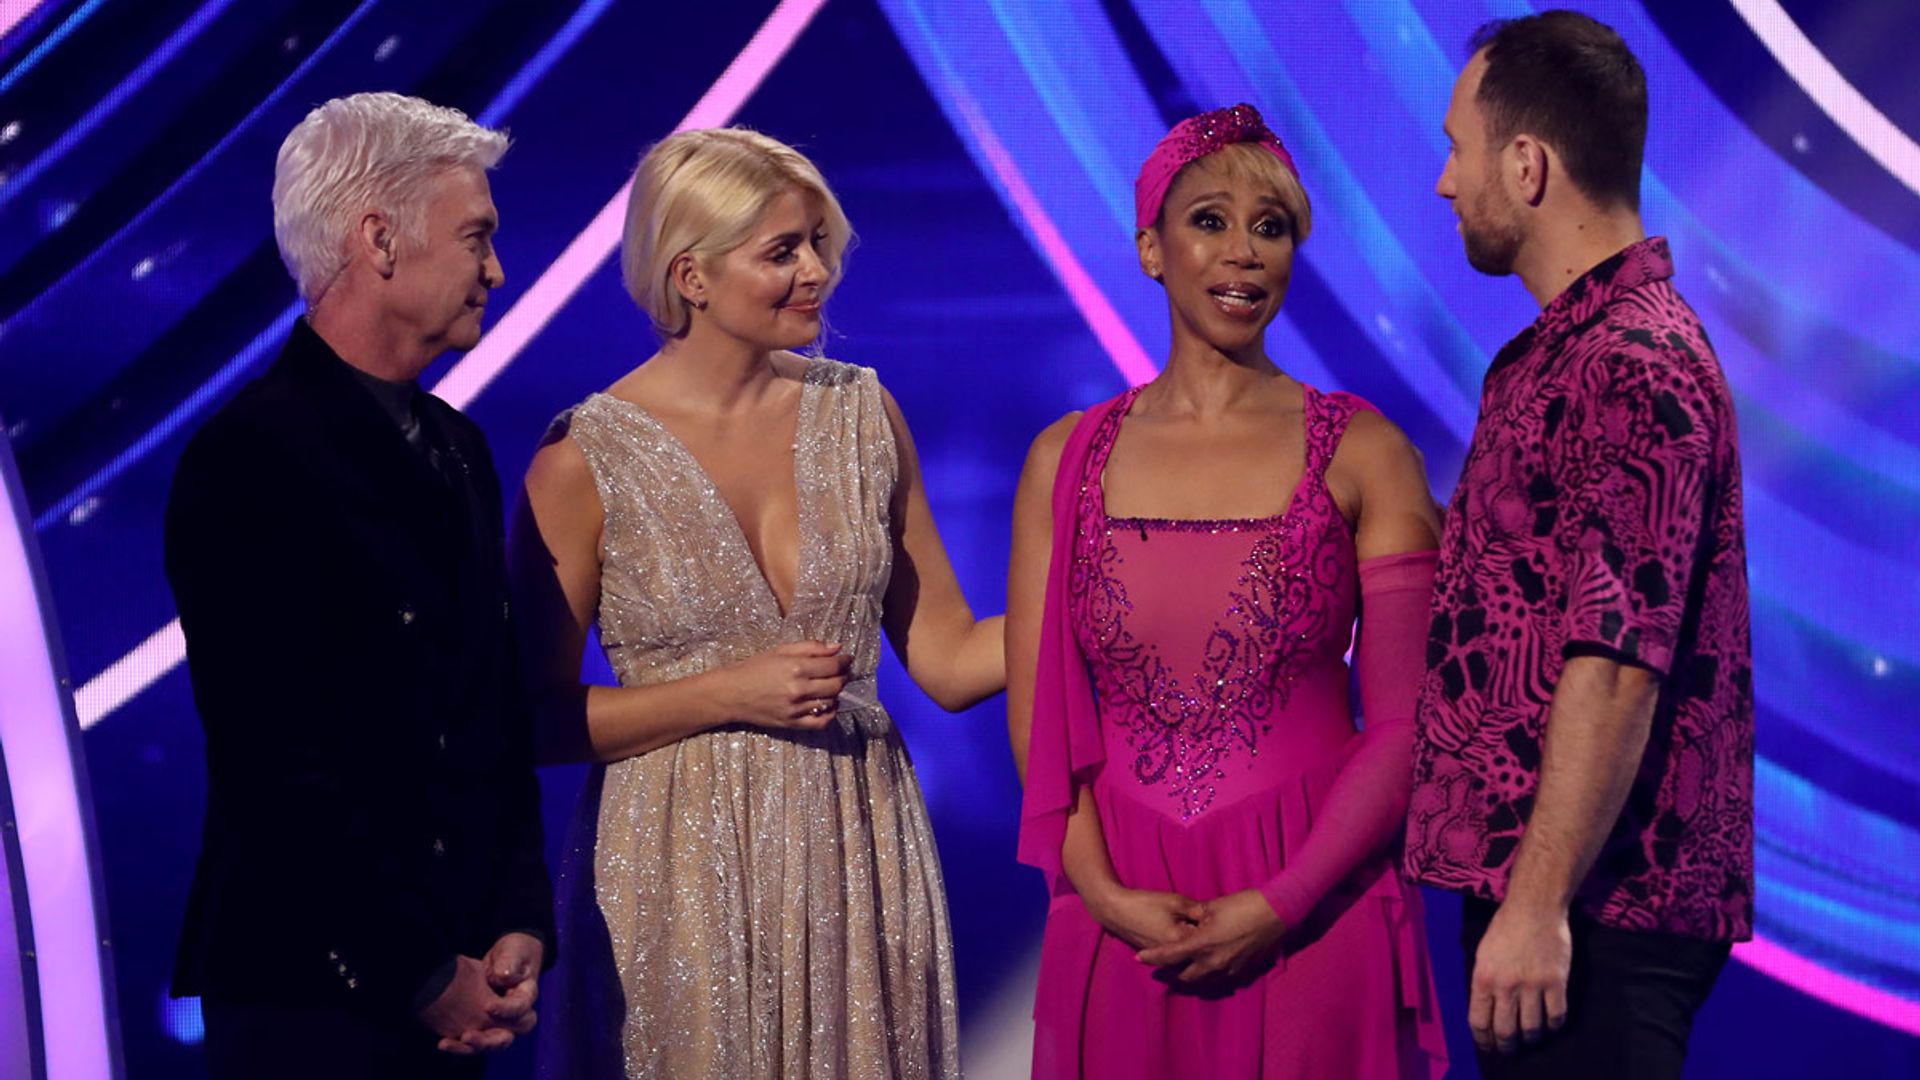 Dancing on Ice's Trisha Goddard breaks down in tears as she opens up about cancer